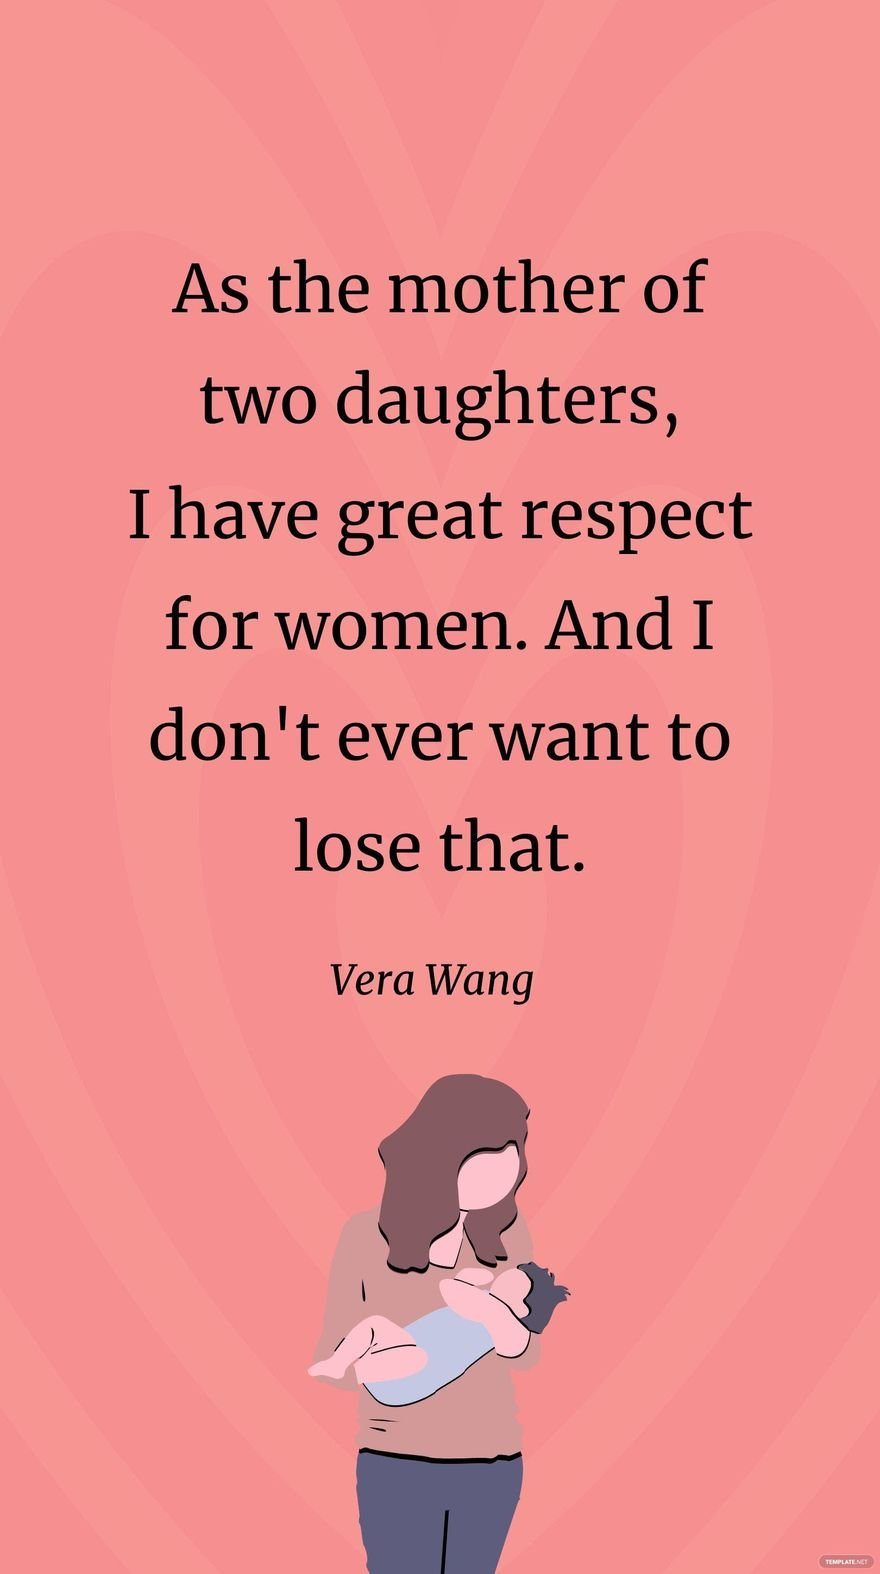 Vera Wang- As the mother of two daughters, I have great respect for women. And I don't ever want to lose that. in JPG